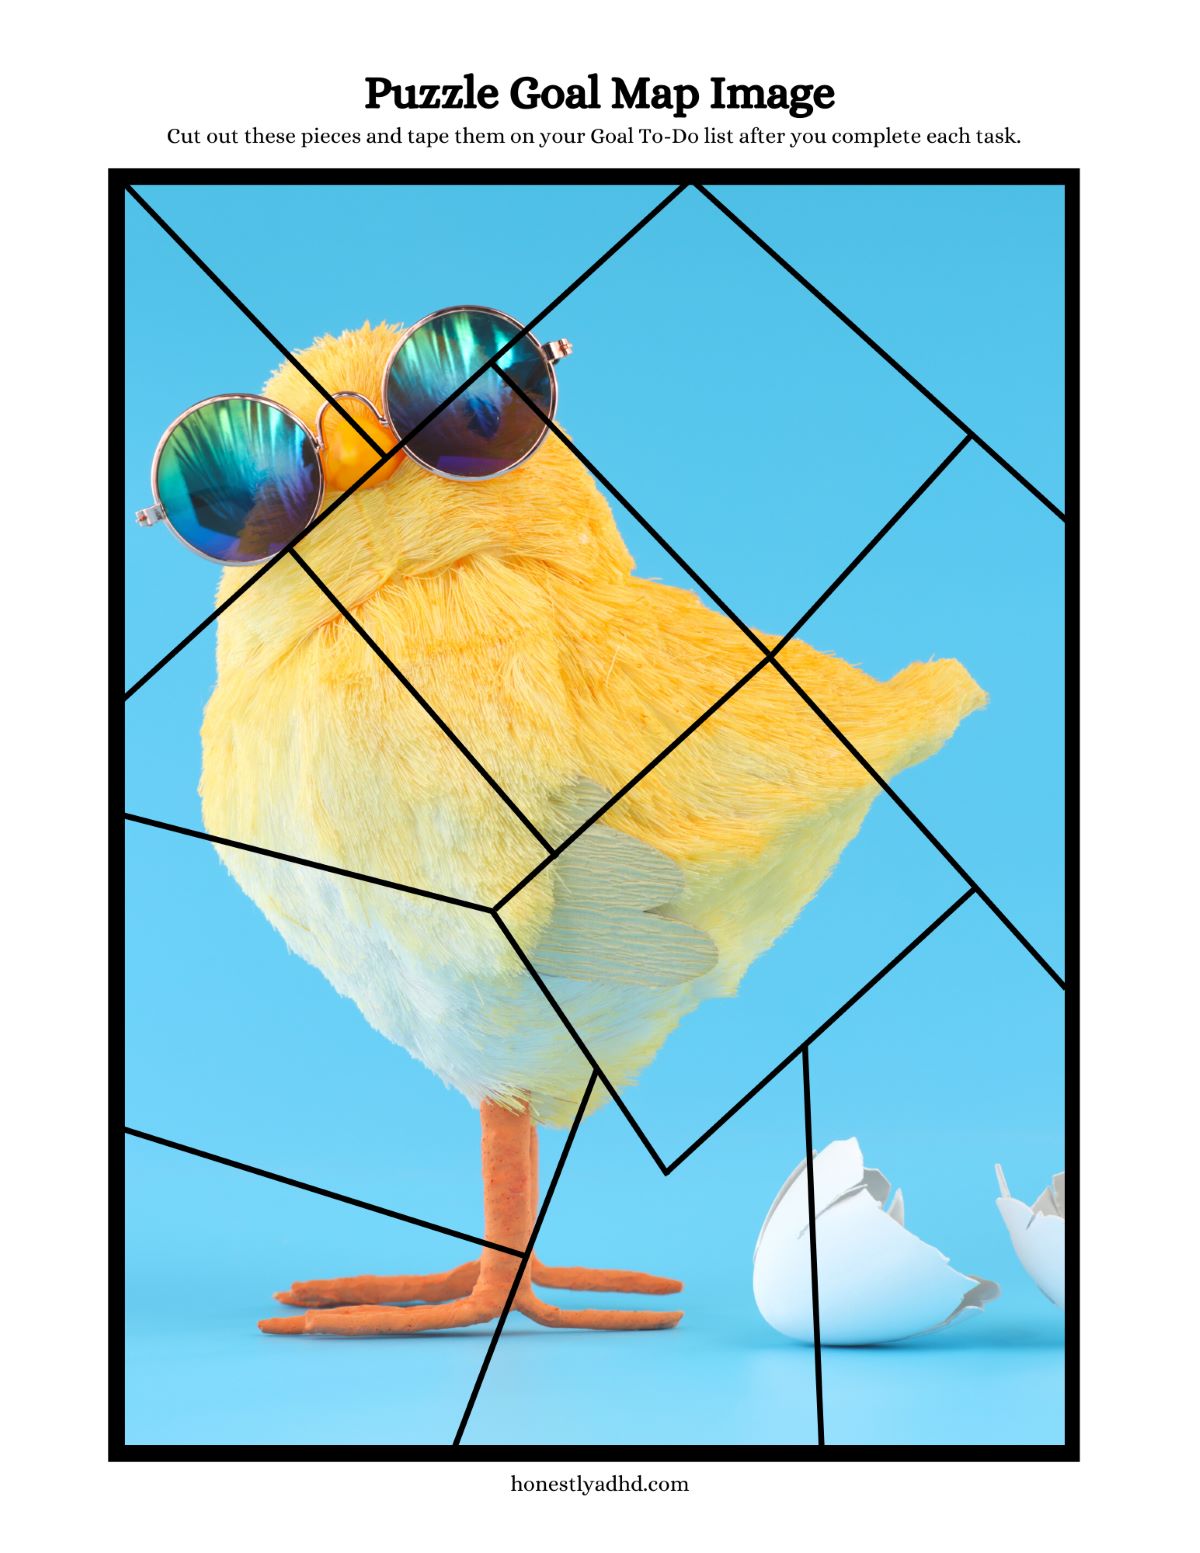 A puzzle printable for ADHD kids featuring a silly image of a baby chick with sunglasses on.